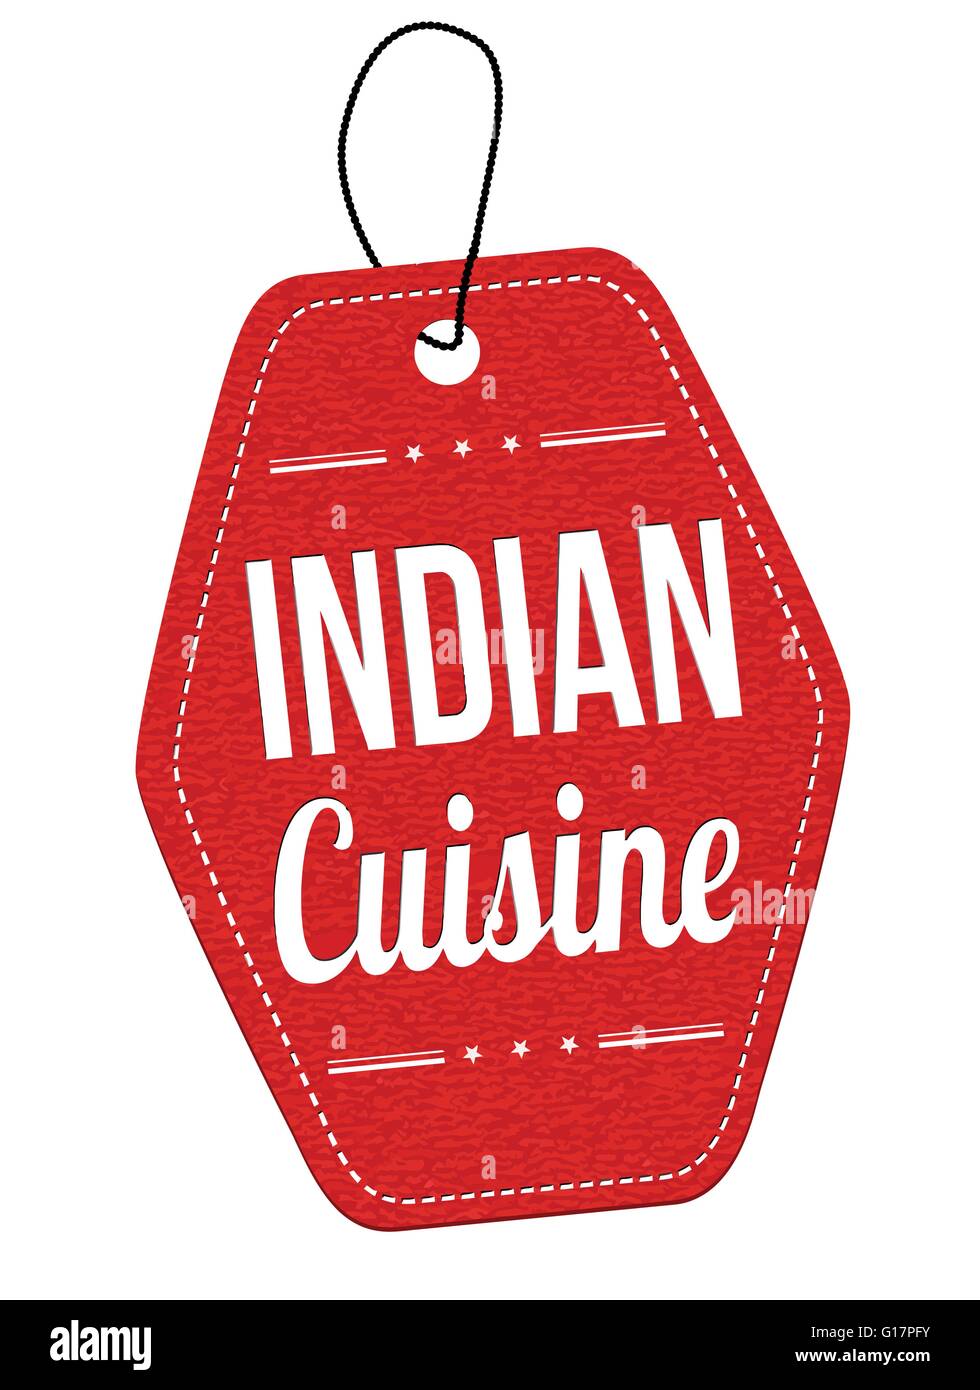 Indian cuisine red leather label or price tag on white background, vector illustration Stock Vector